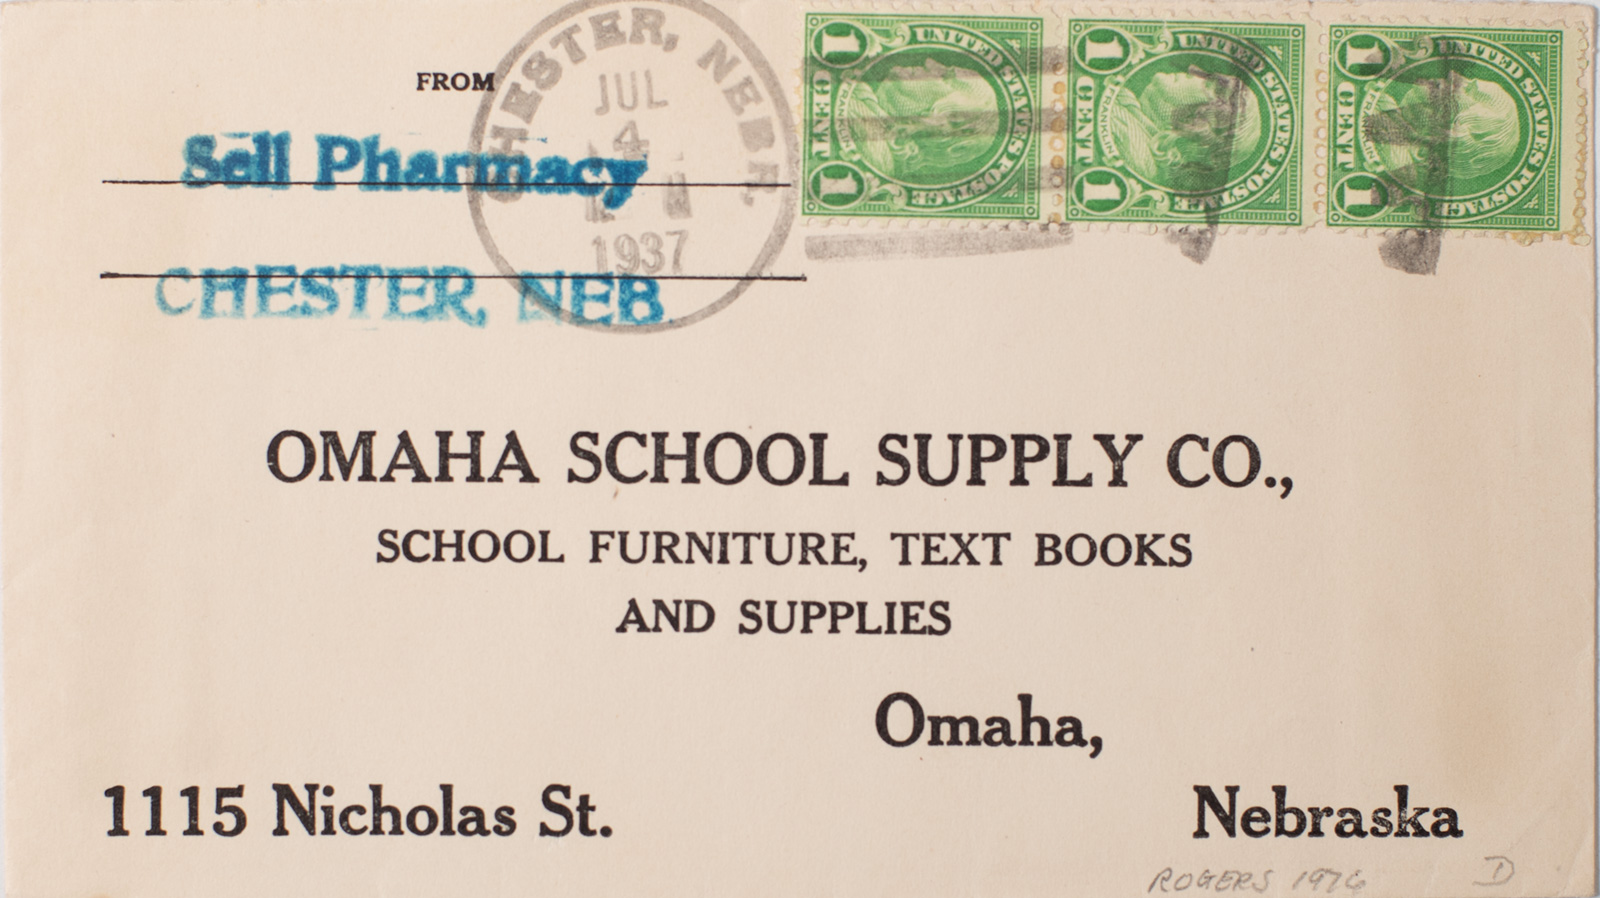 Envelope mailed from Sells Pharmacy to Omaha School Supply 1937-image